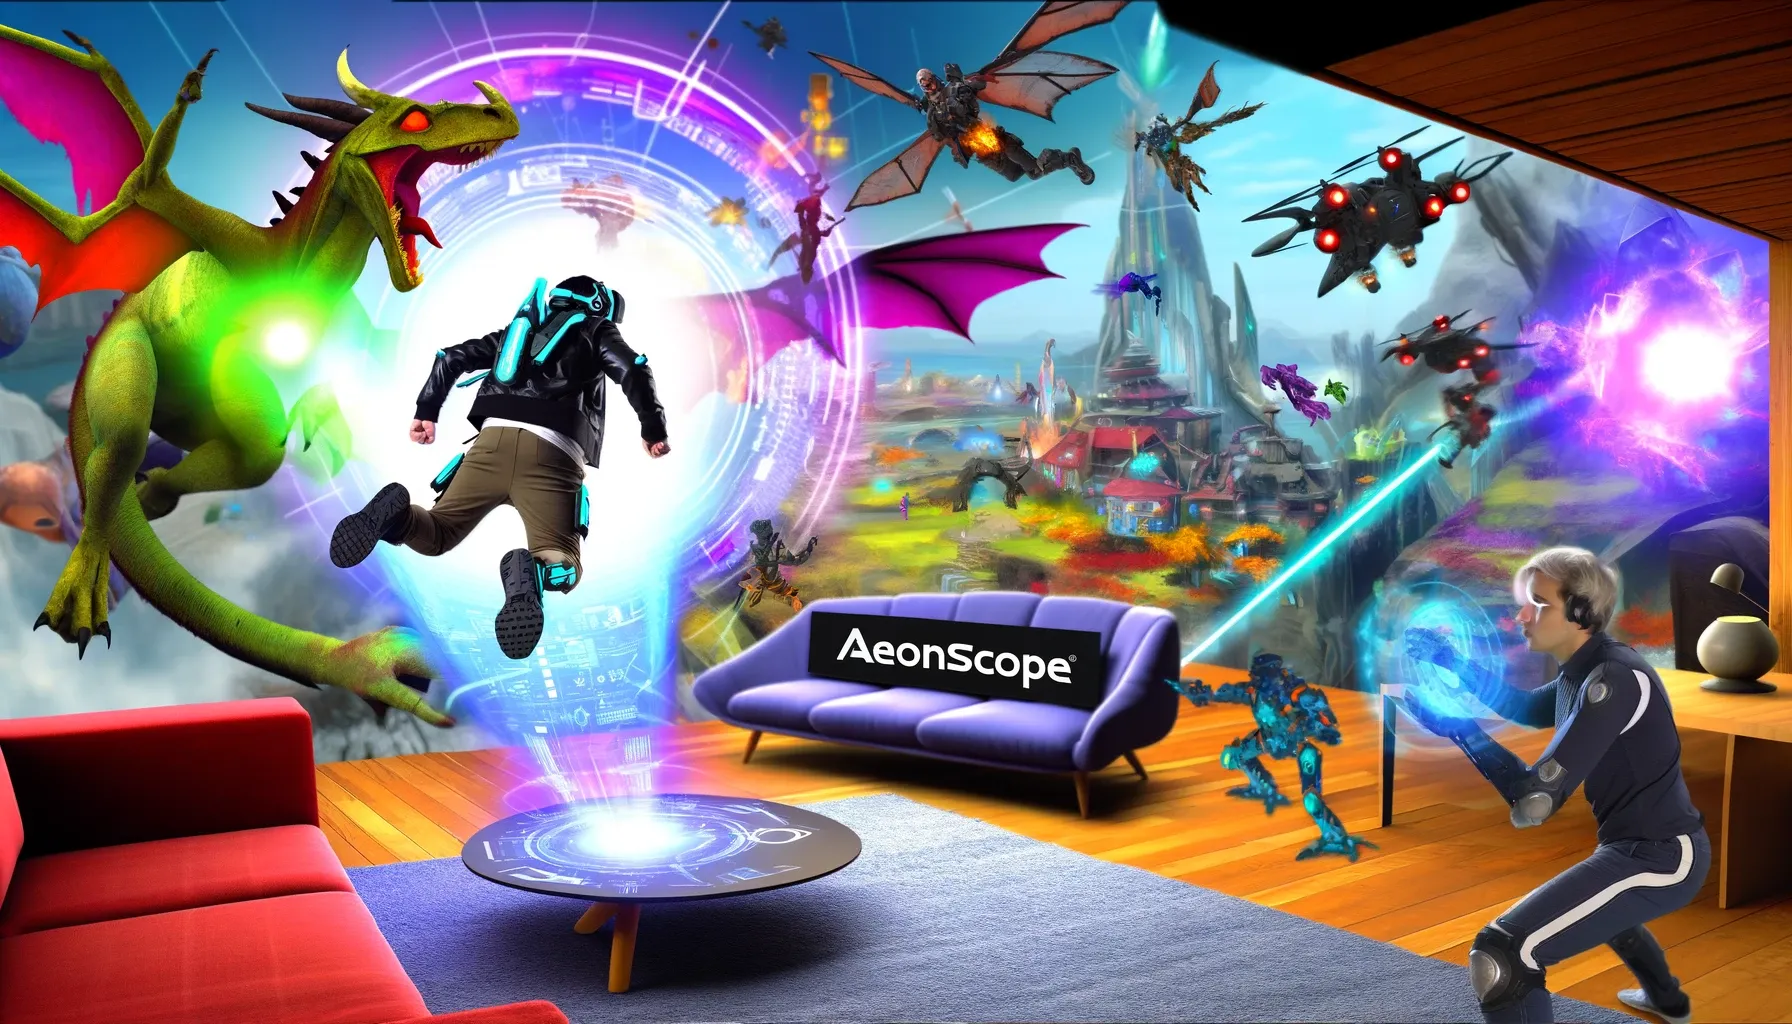 Aeonscope Video Gaming: Stepping into the Future of Play!